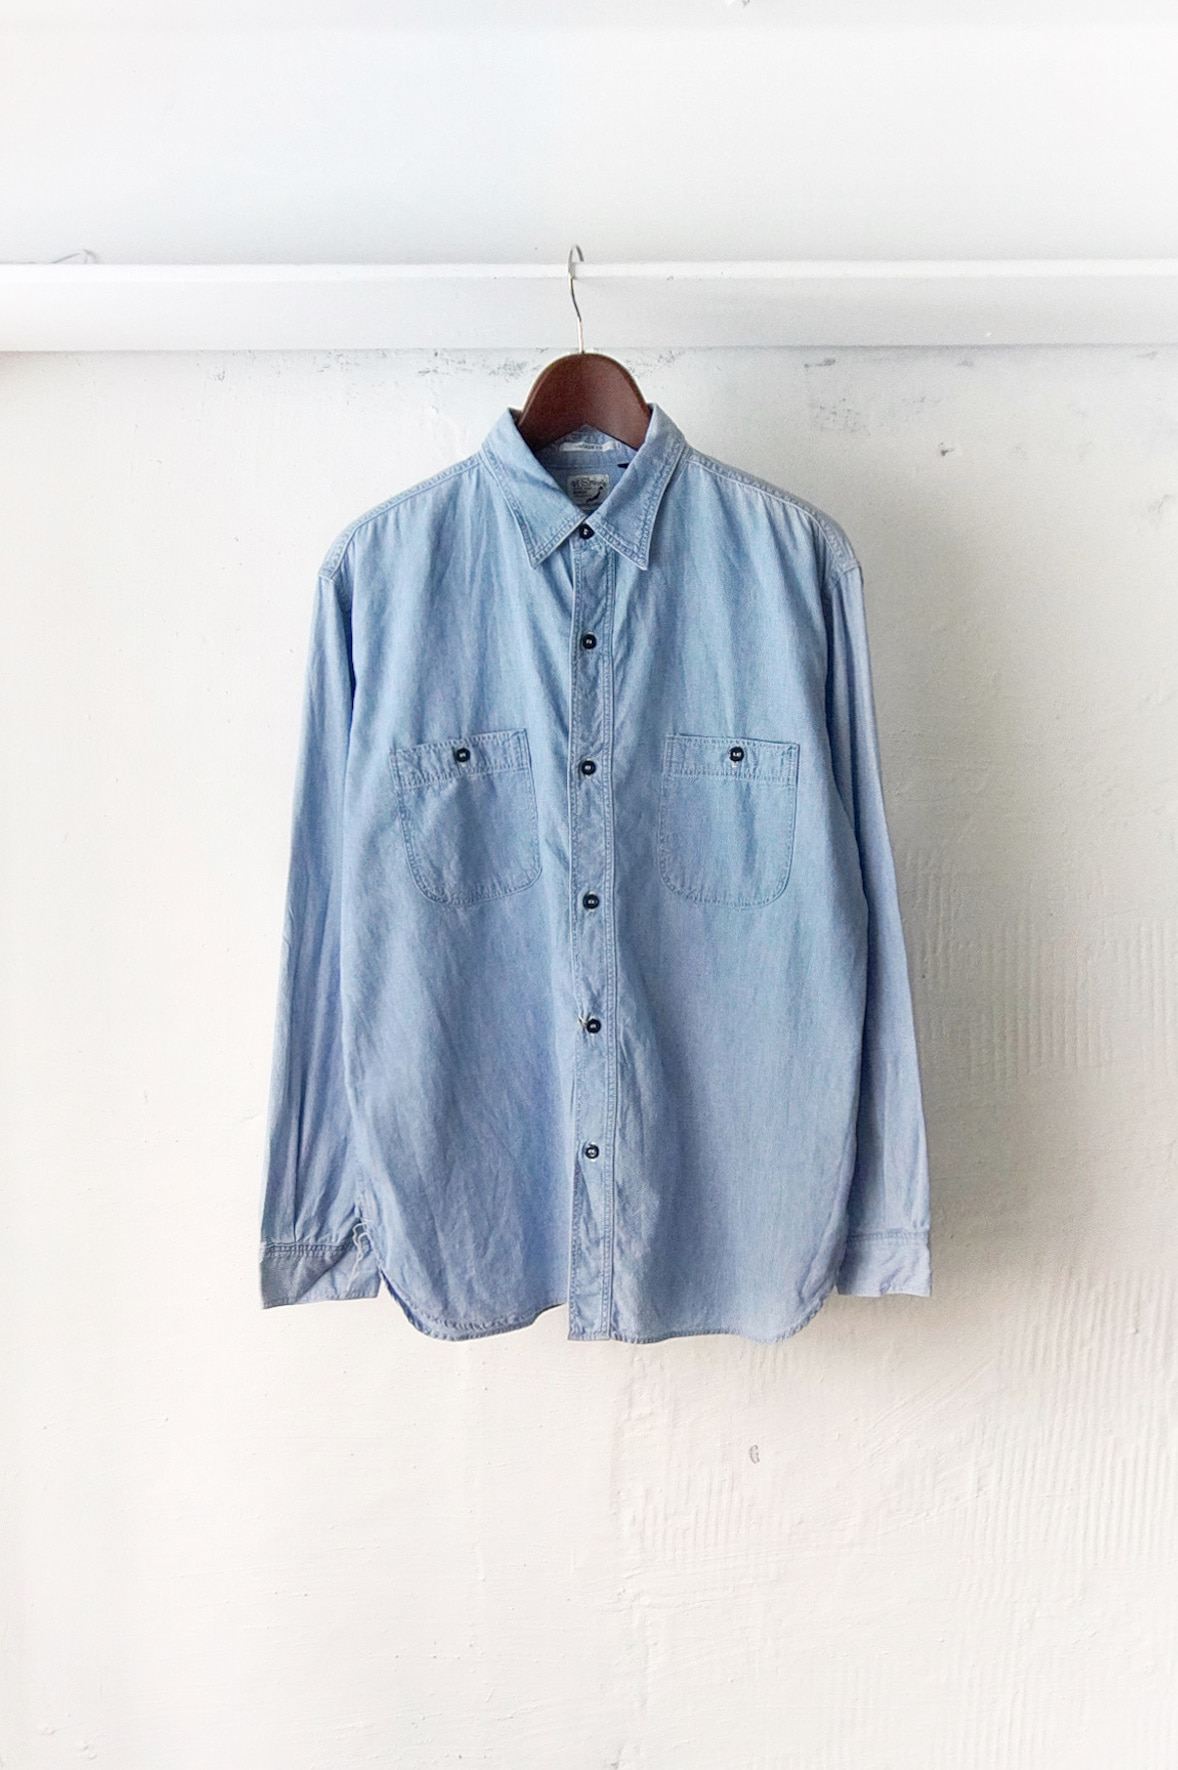 Restock! [ORSLOW]  Vintage Fit Chambray Work Shirt Used Wash